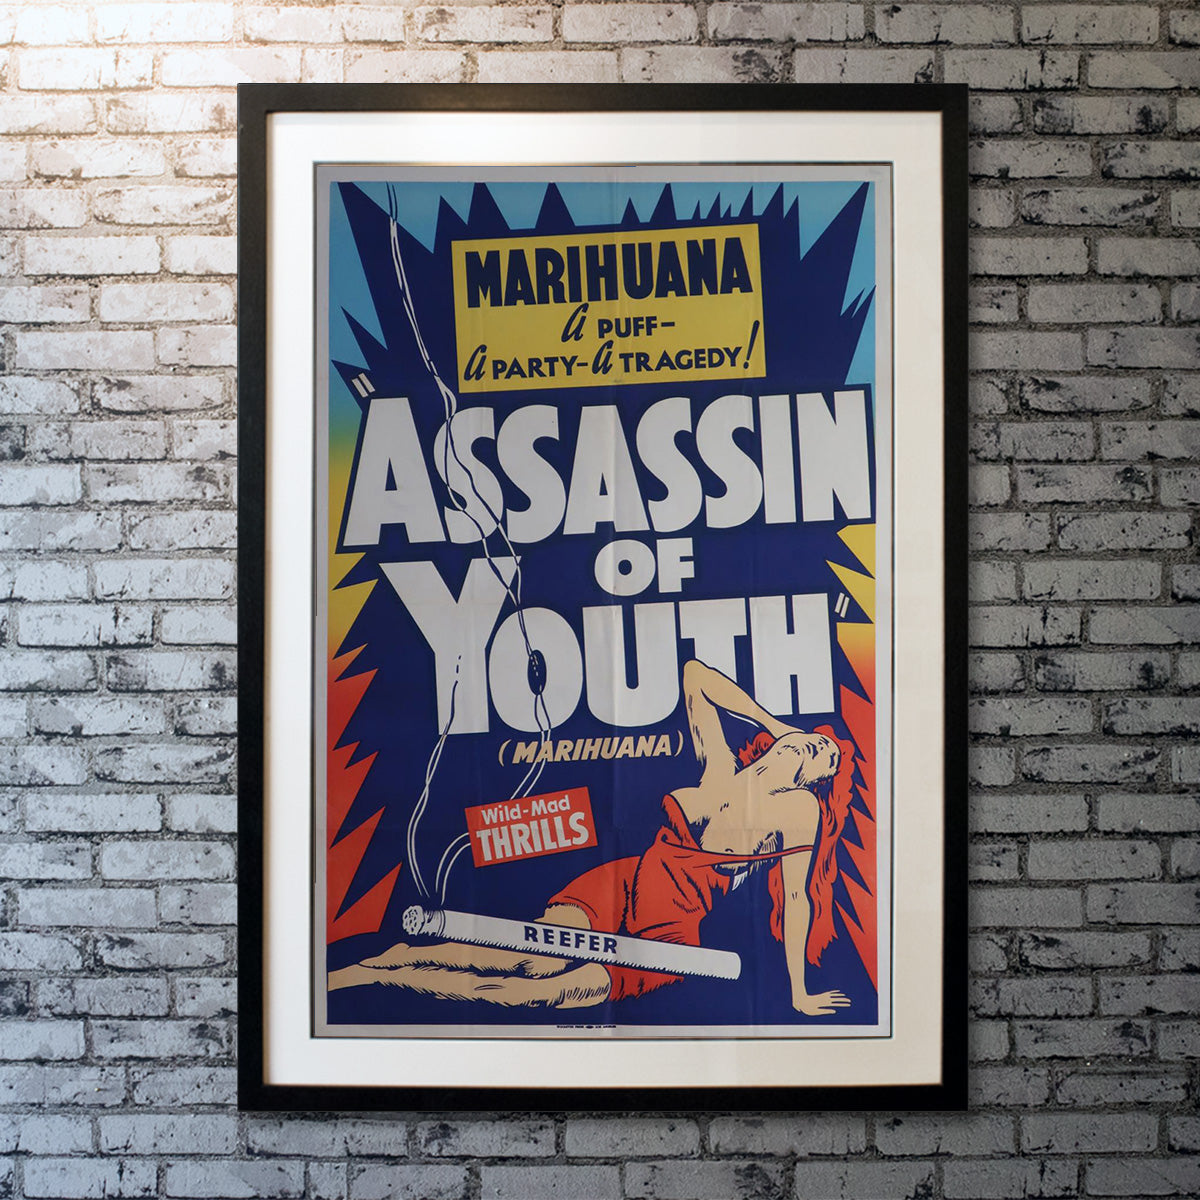 Original Movie Poster of Assassin Of Youth (1938)